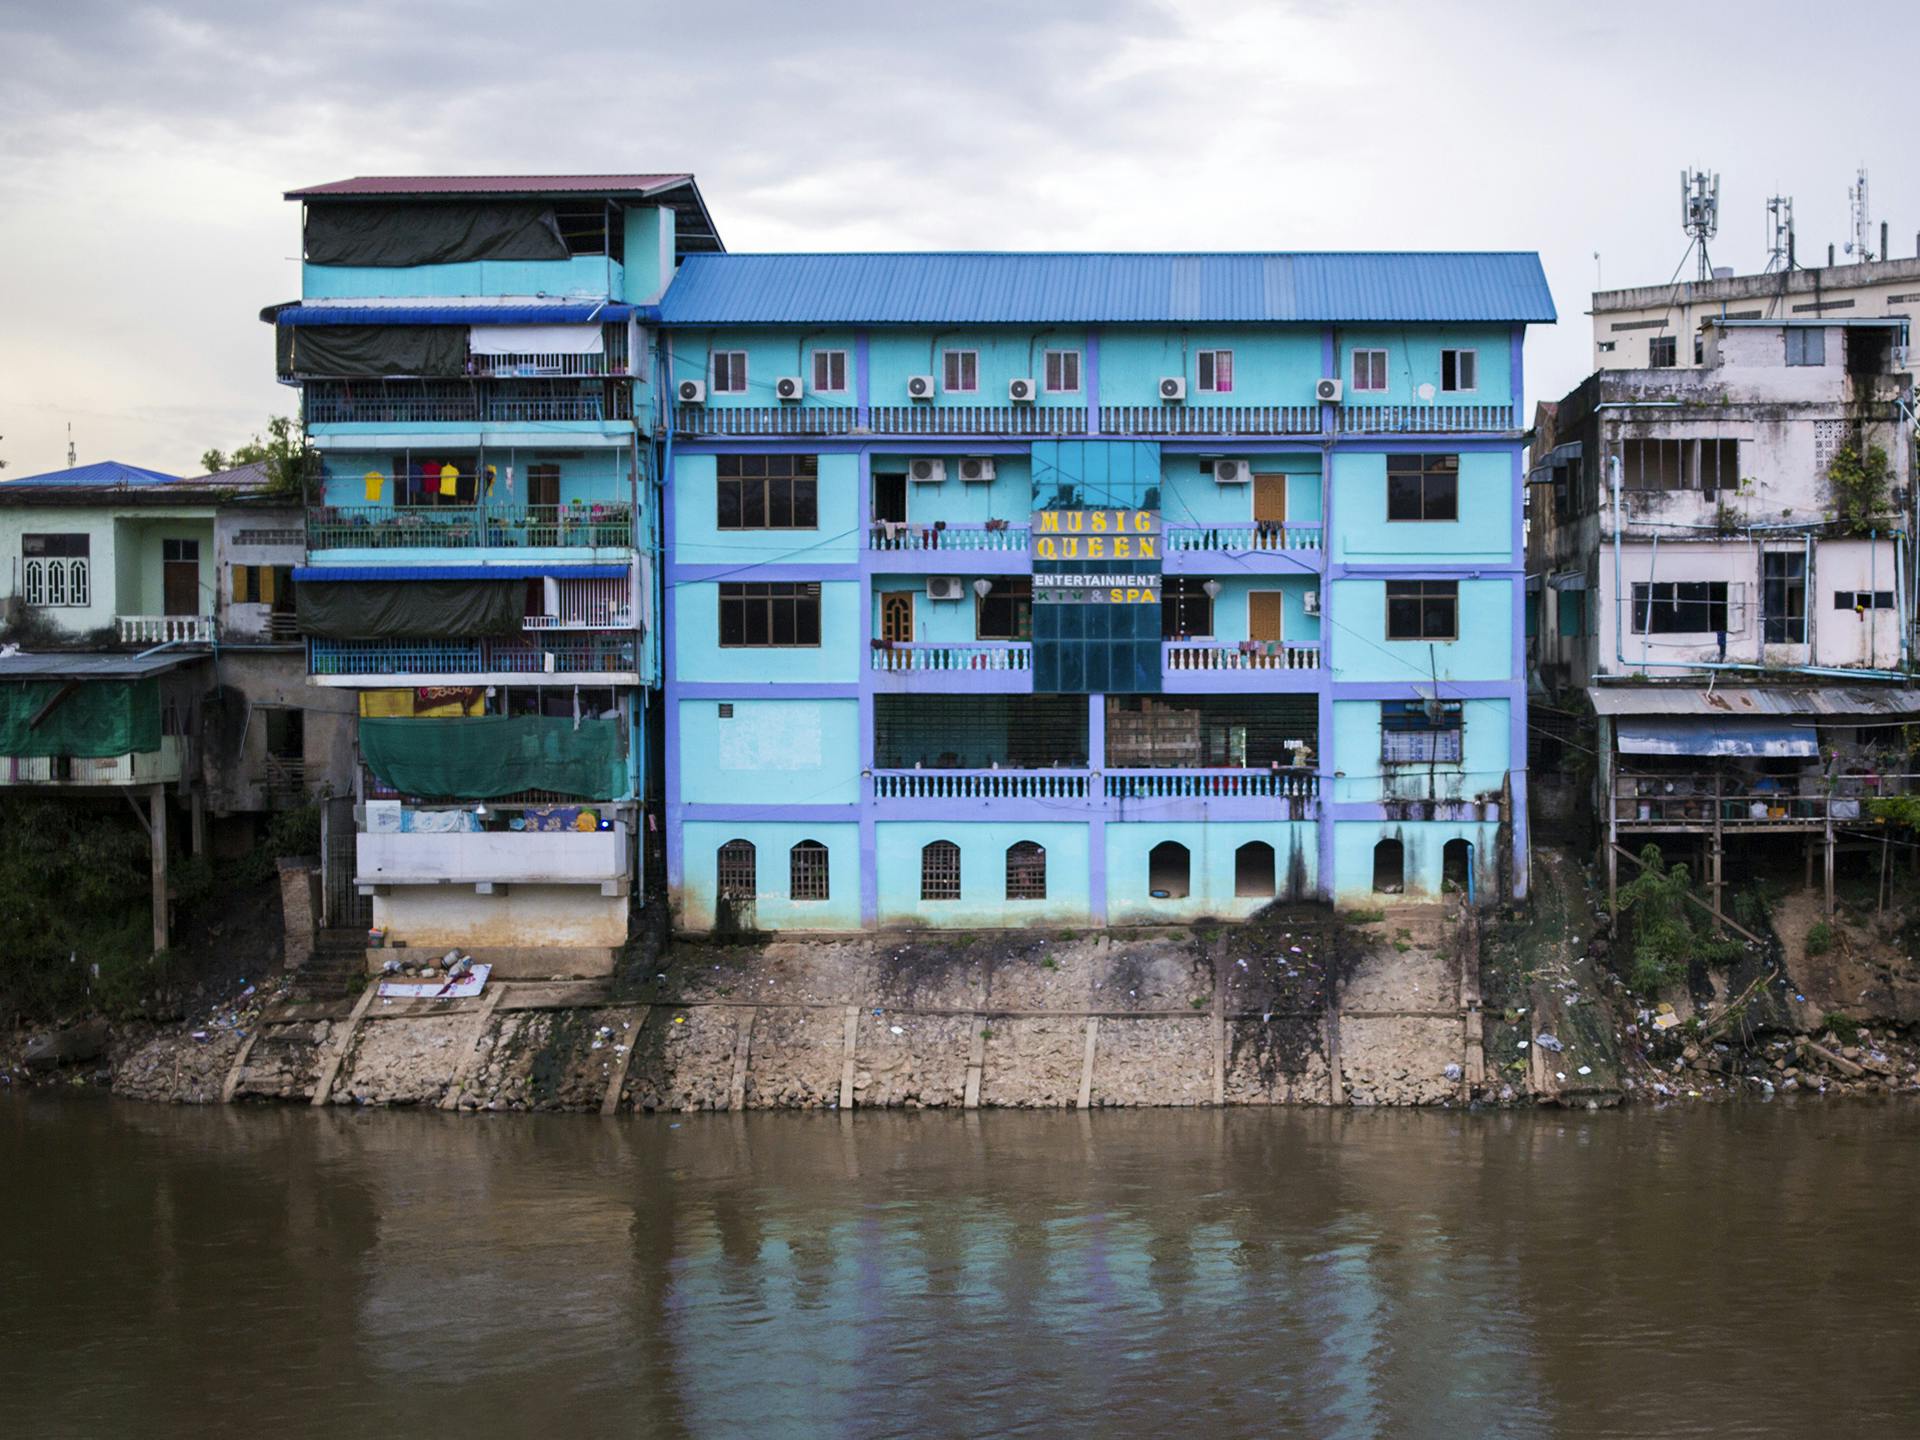 A view of a river and a house by the river